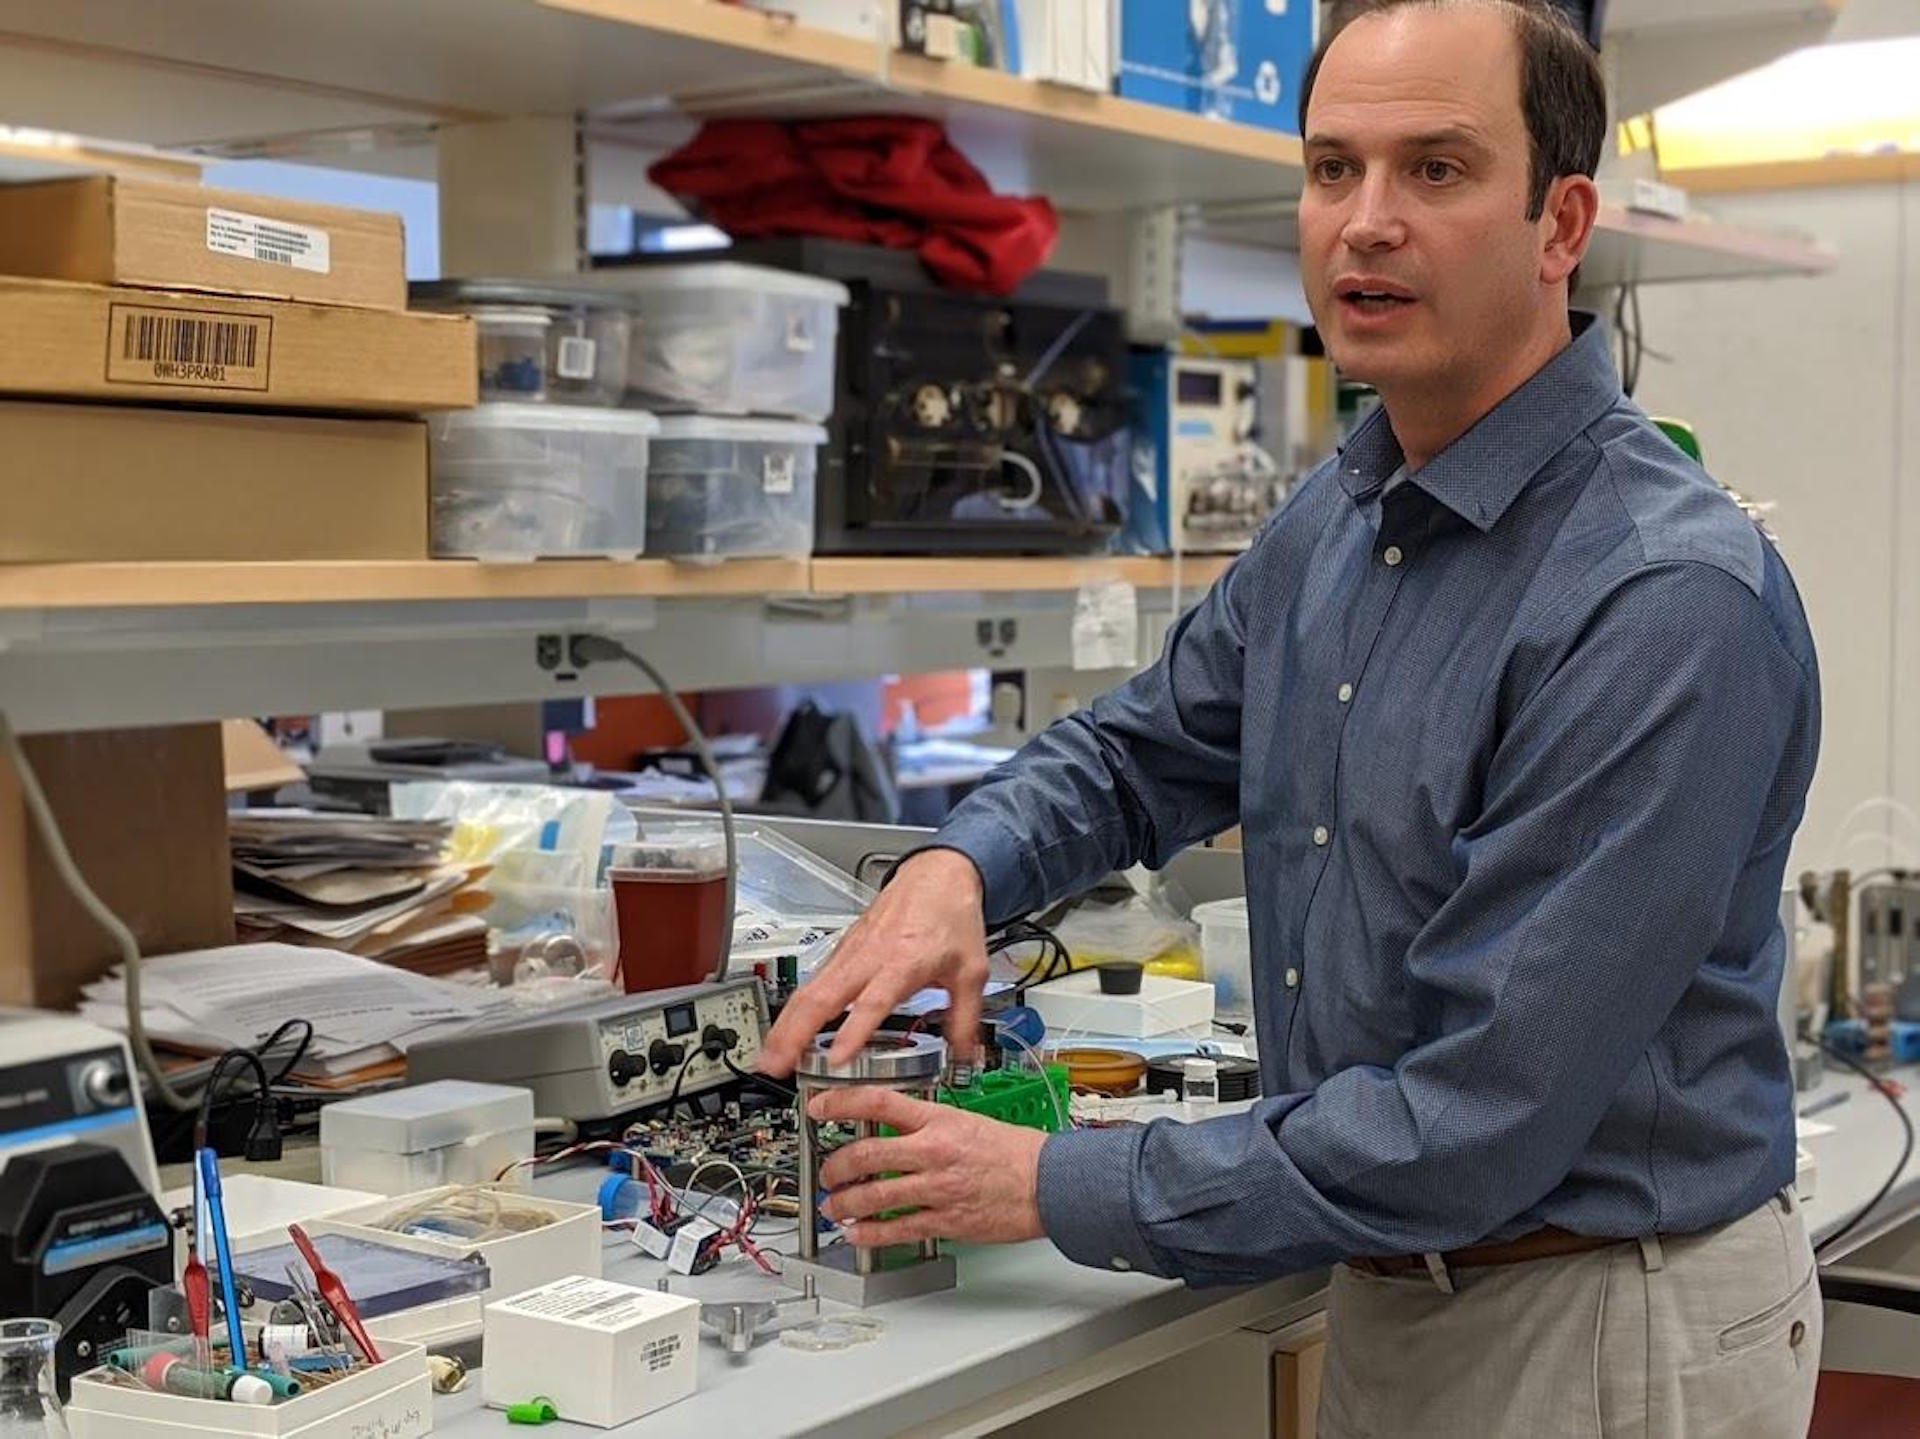 University of Pittsburgh School of Dental Medicine professor Juan Taboas said he tinkered on electronics with his dad as a kid; he now uses those same skills for his research on tissue regeneration.